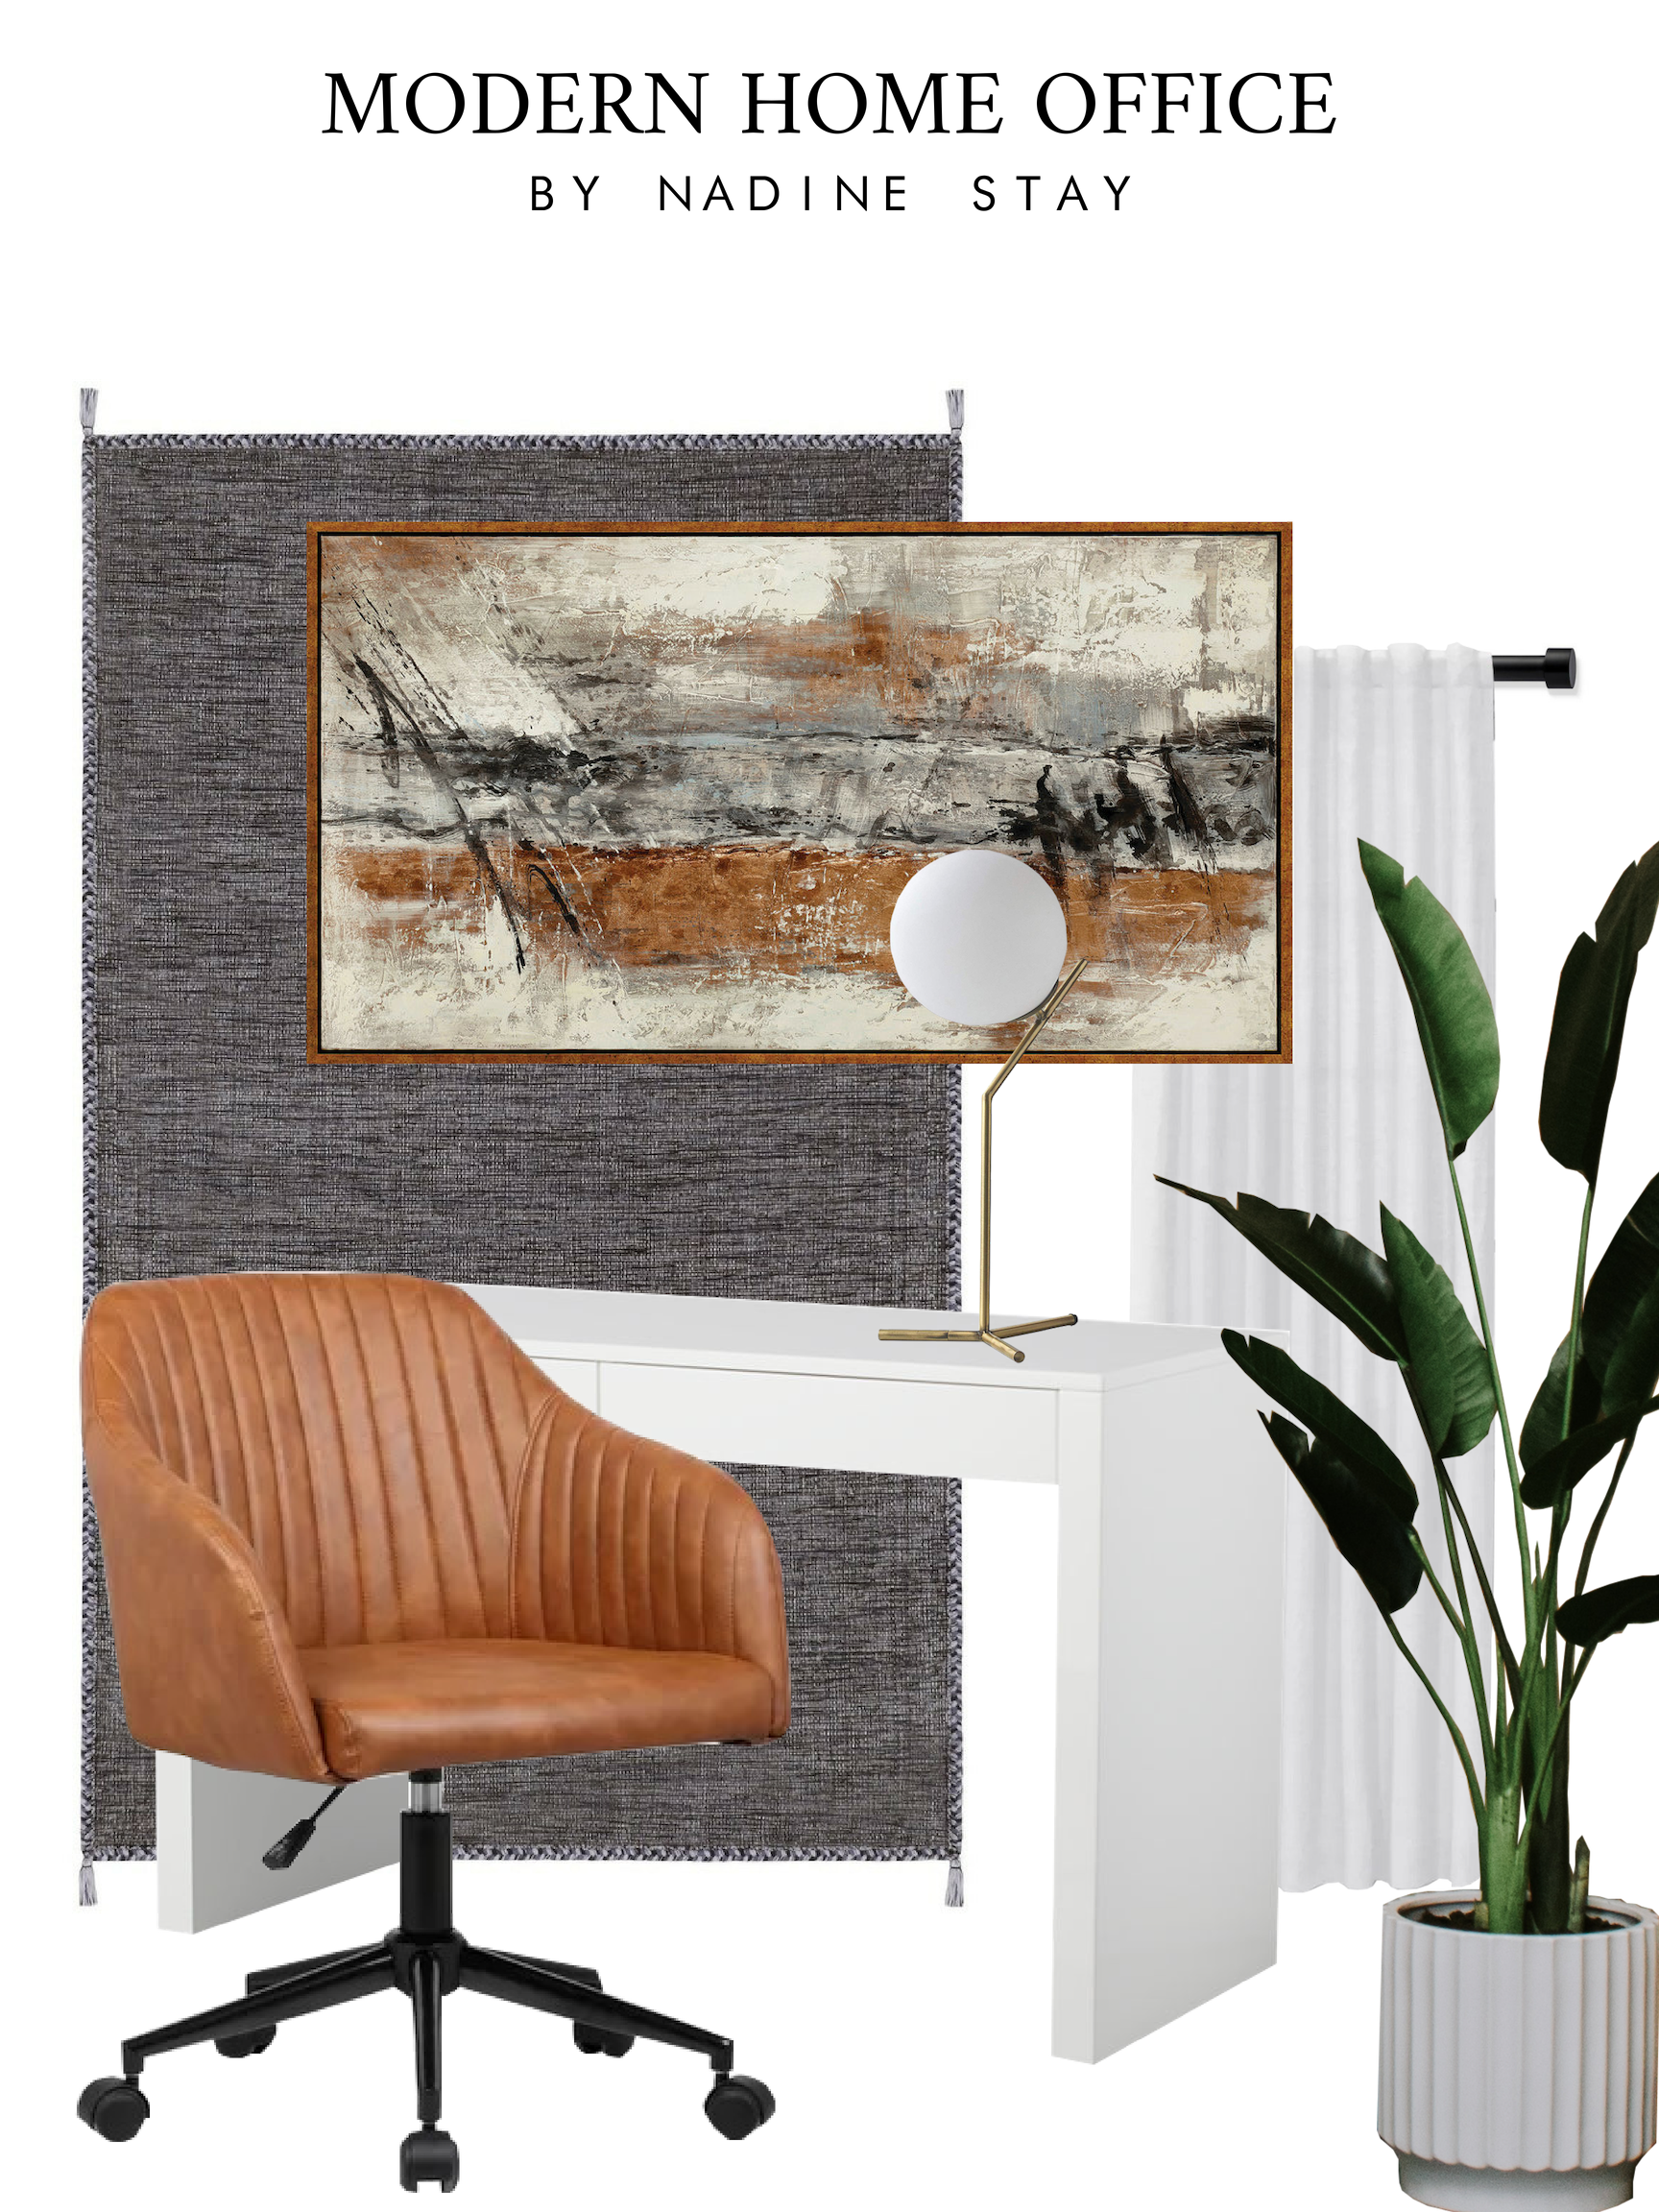 Home office inspiration & game plan - Converting our guest bedroom into an office. Waterfall desk, leather office chairs, black rug, and a walnut mid century dresser. Styling an office by Nadine Stay